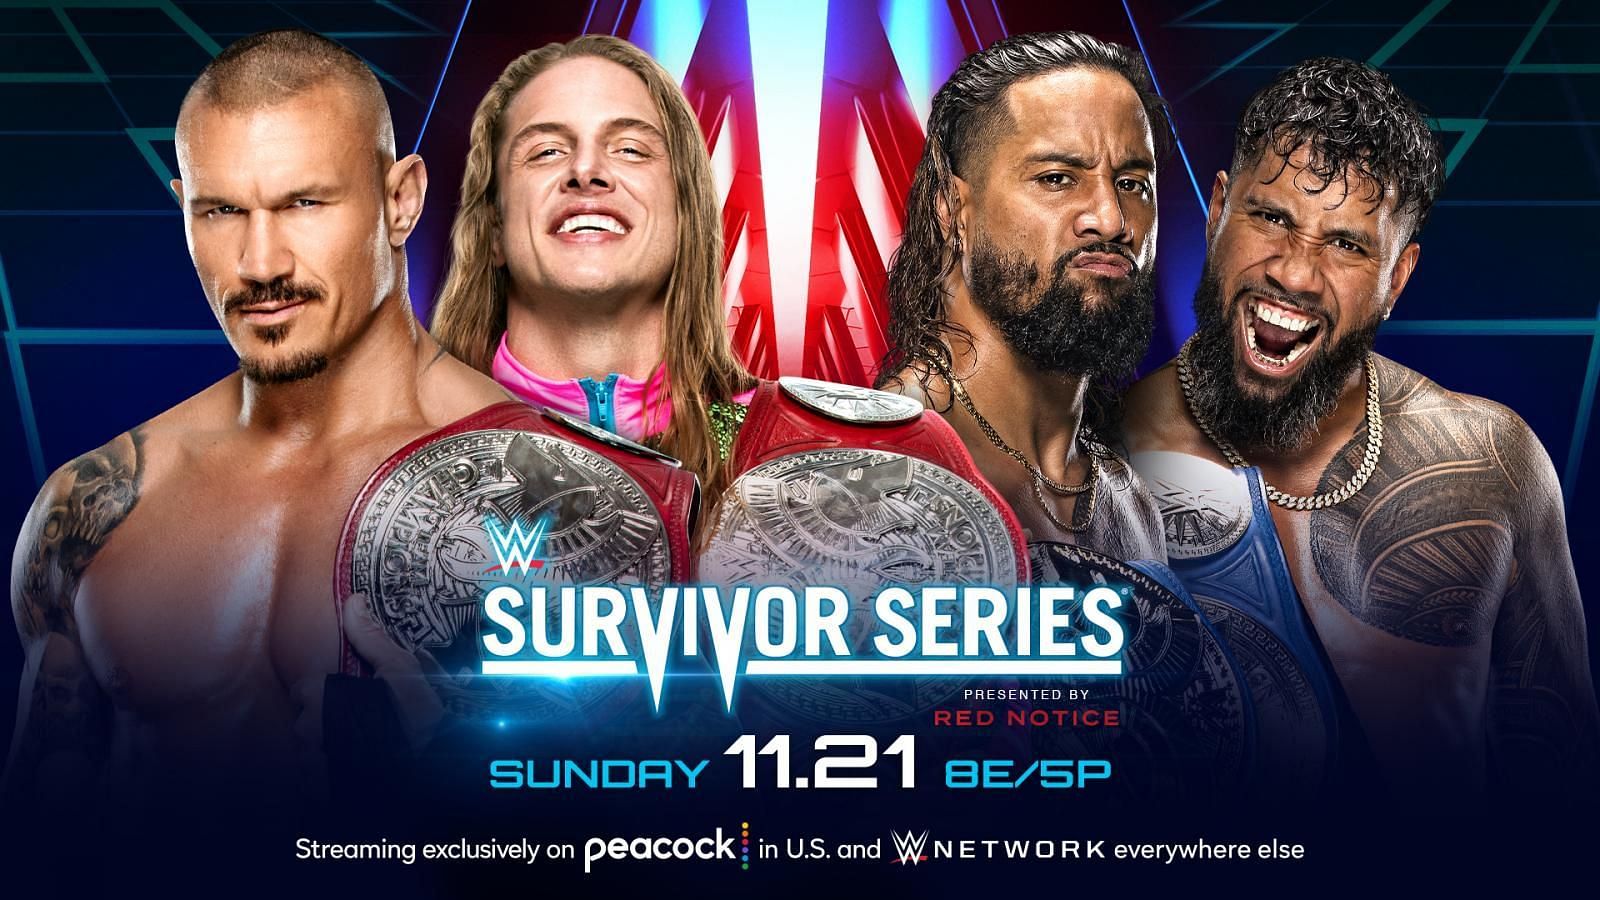 Will RK-Bro prevail, or will The Usos seal the deal at Survivor Series?